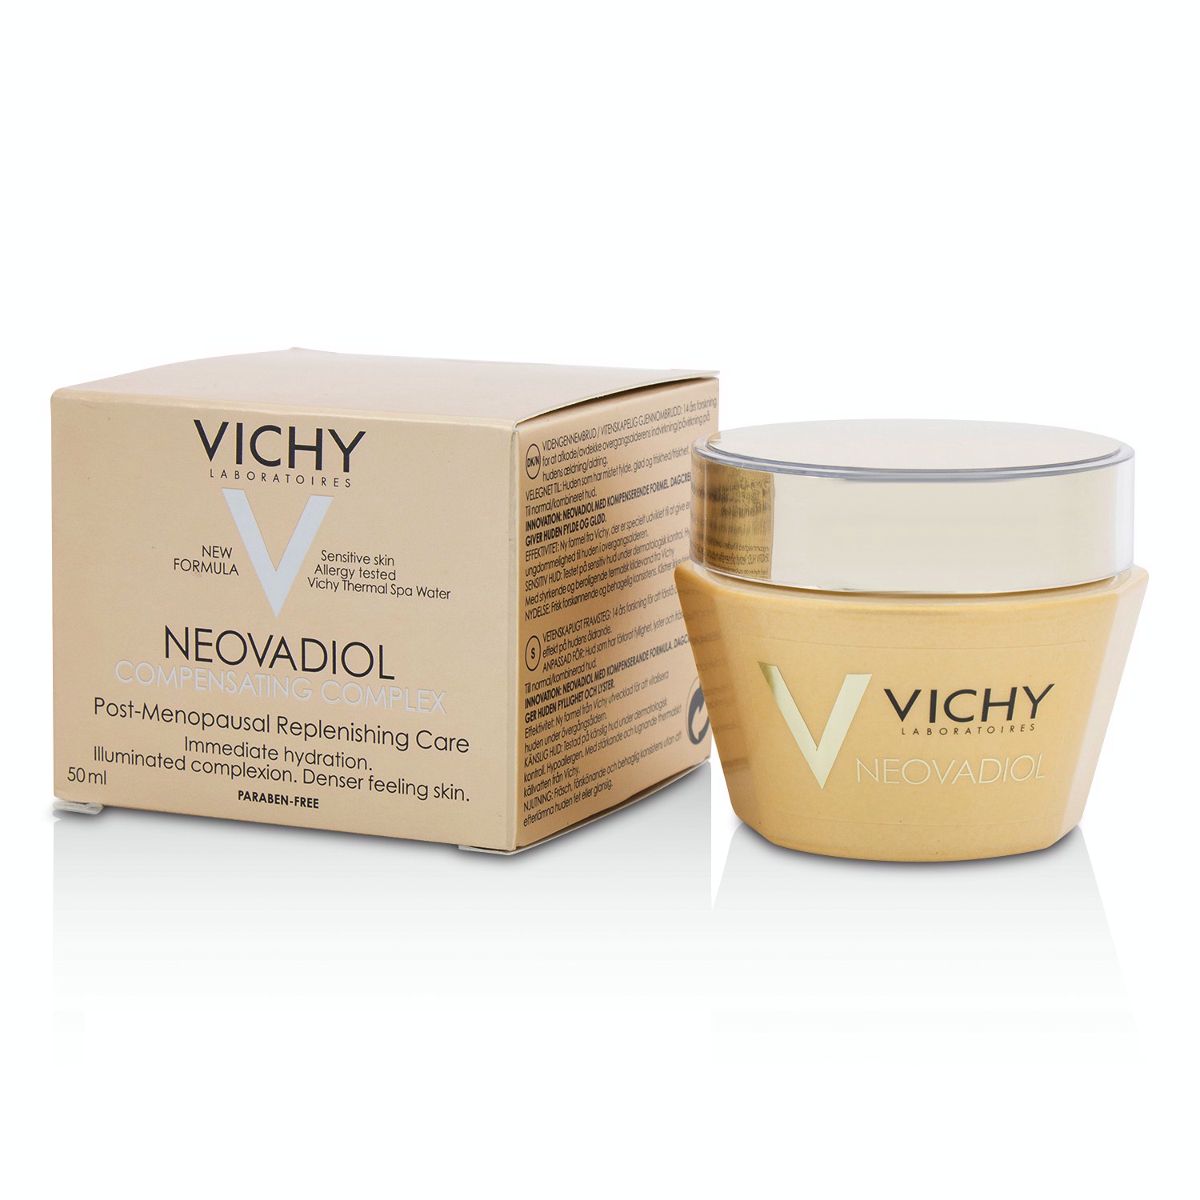 Neovadiol Compensating Complex Post-Menopausal Replensishing Care - For Sensitive Skin Vichy Image